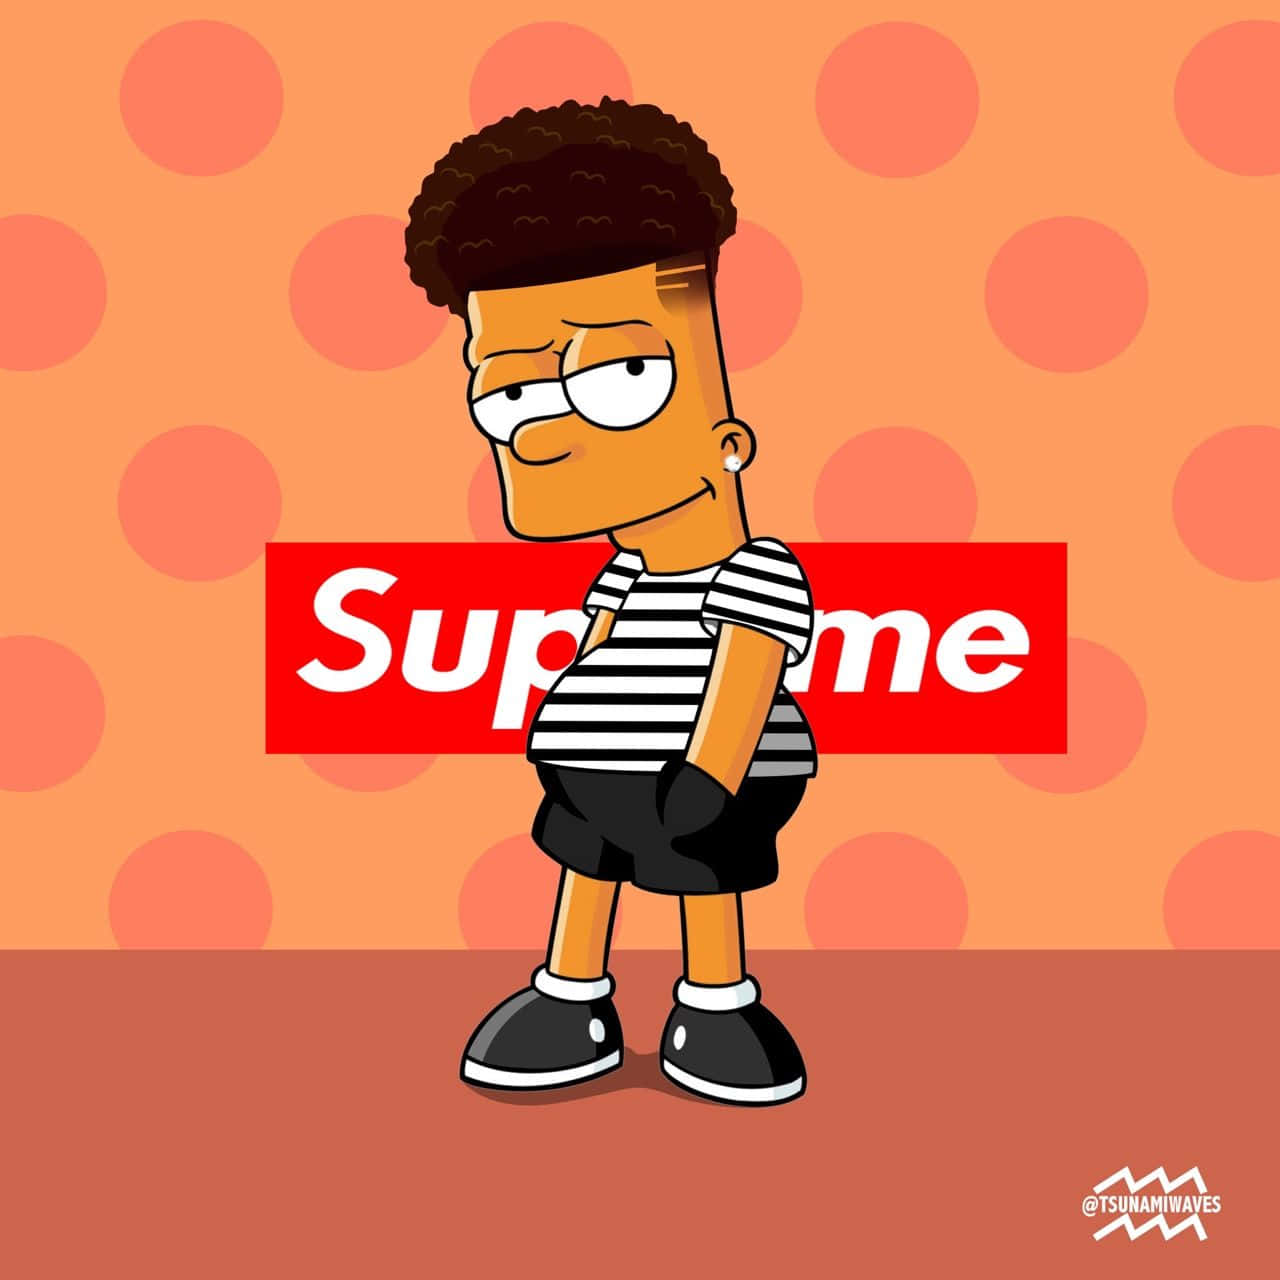 Get up to No Good in Style with Supreme Bart Simpson Wallpaper